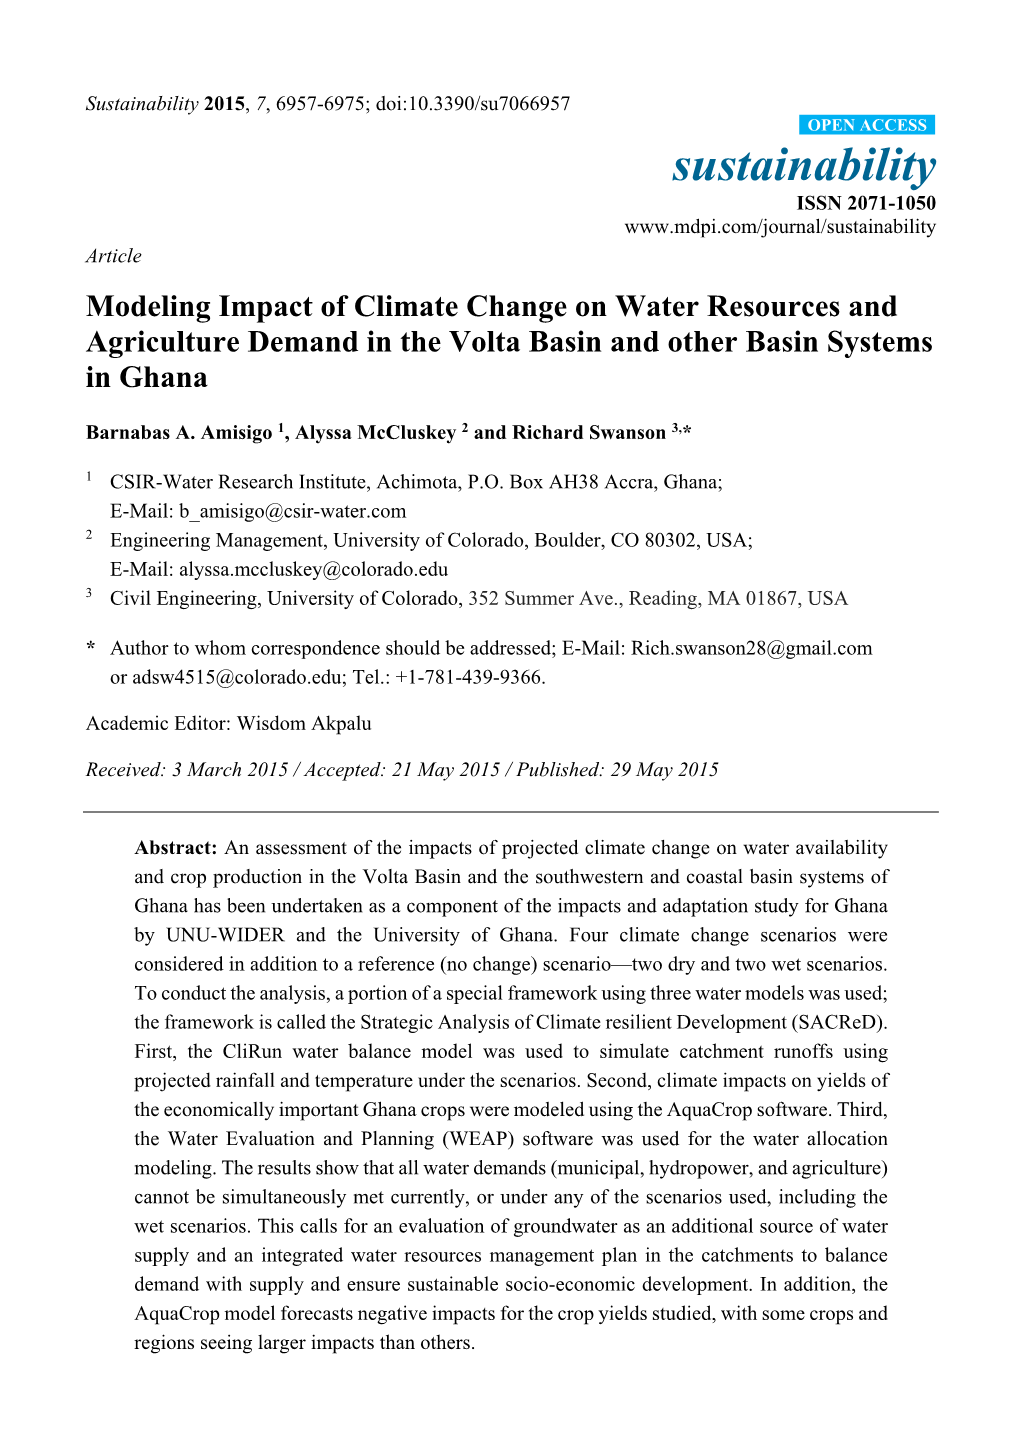 Modeling Impact of Climate Change on Water Resources and Agriculture Demand in the Volta Basin and Other Basin Systems in Ghana